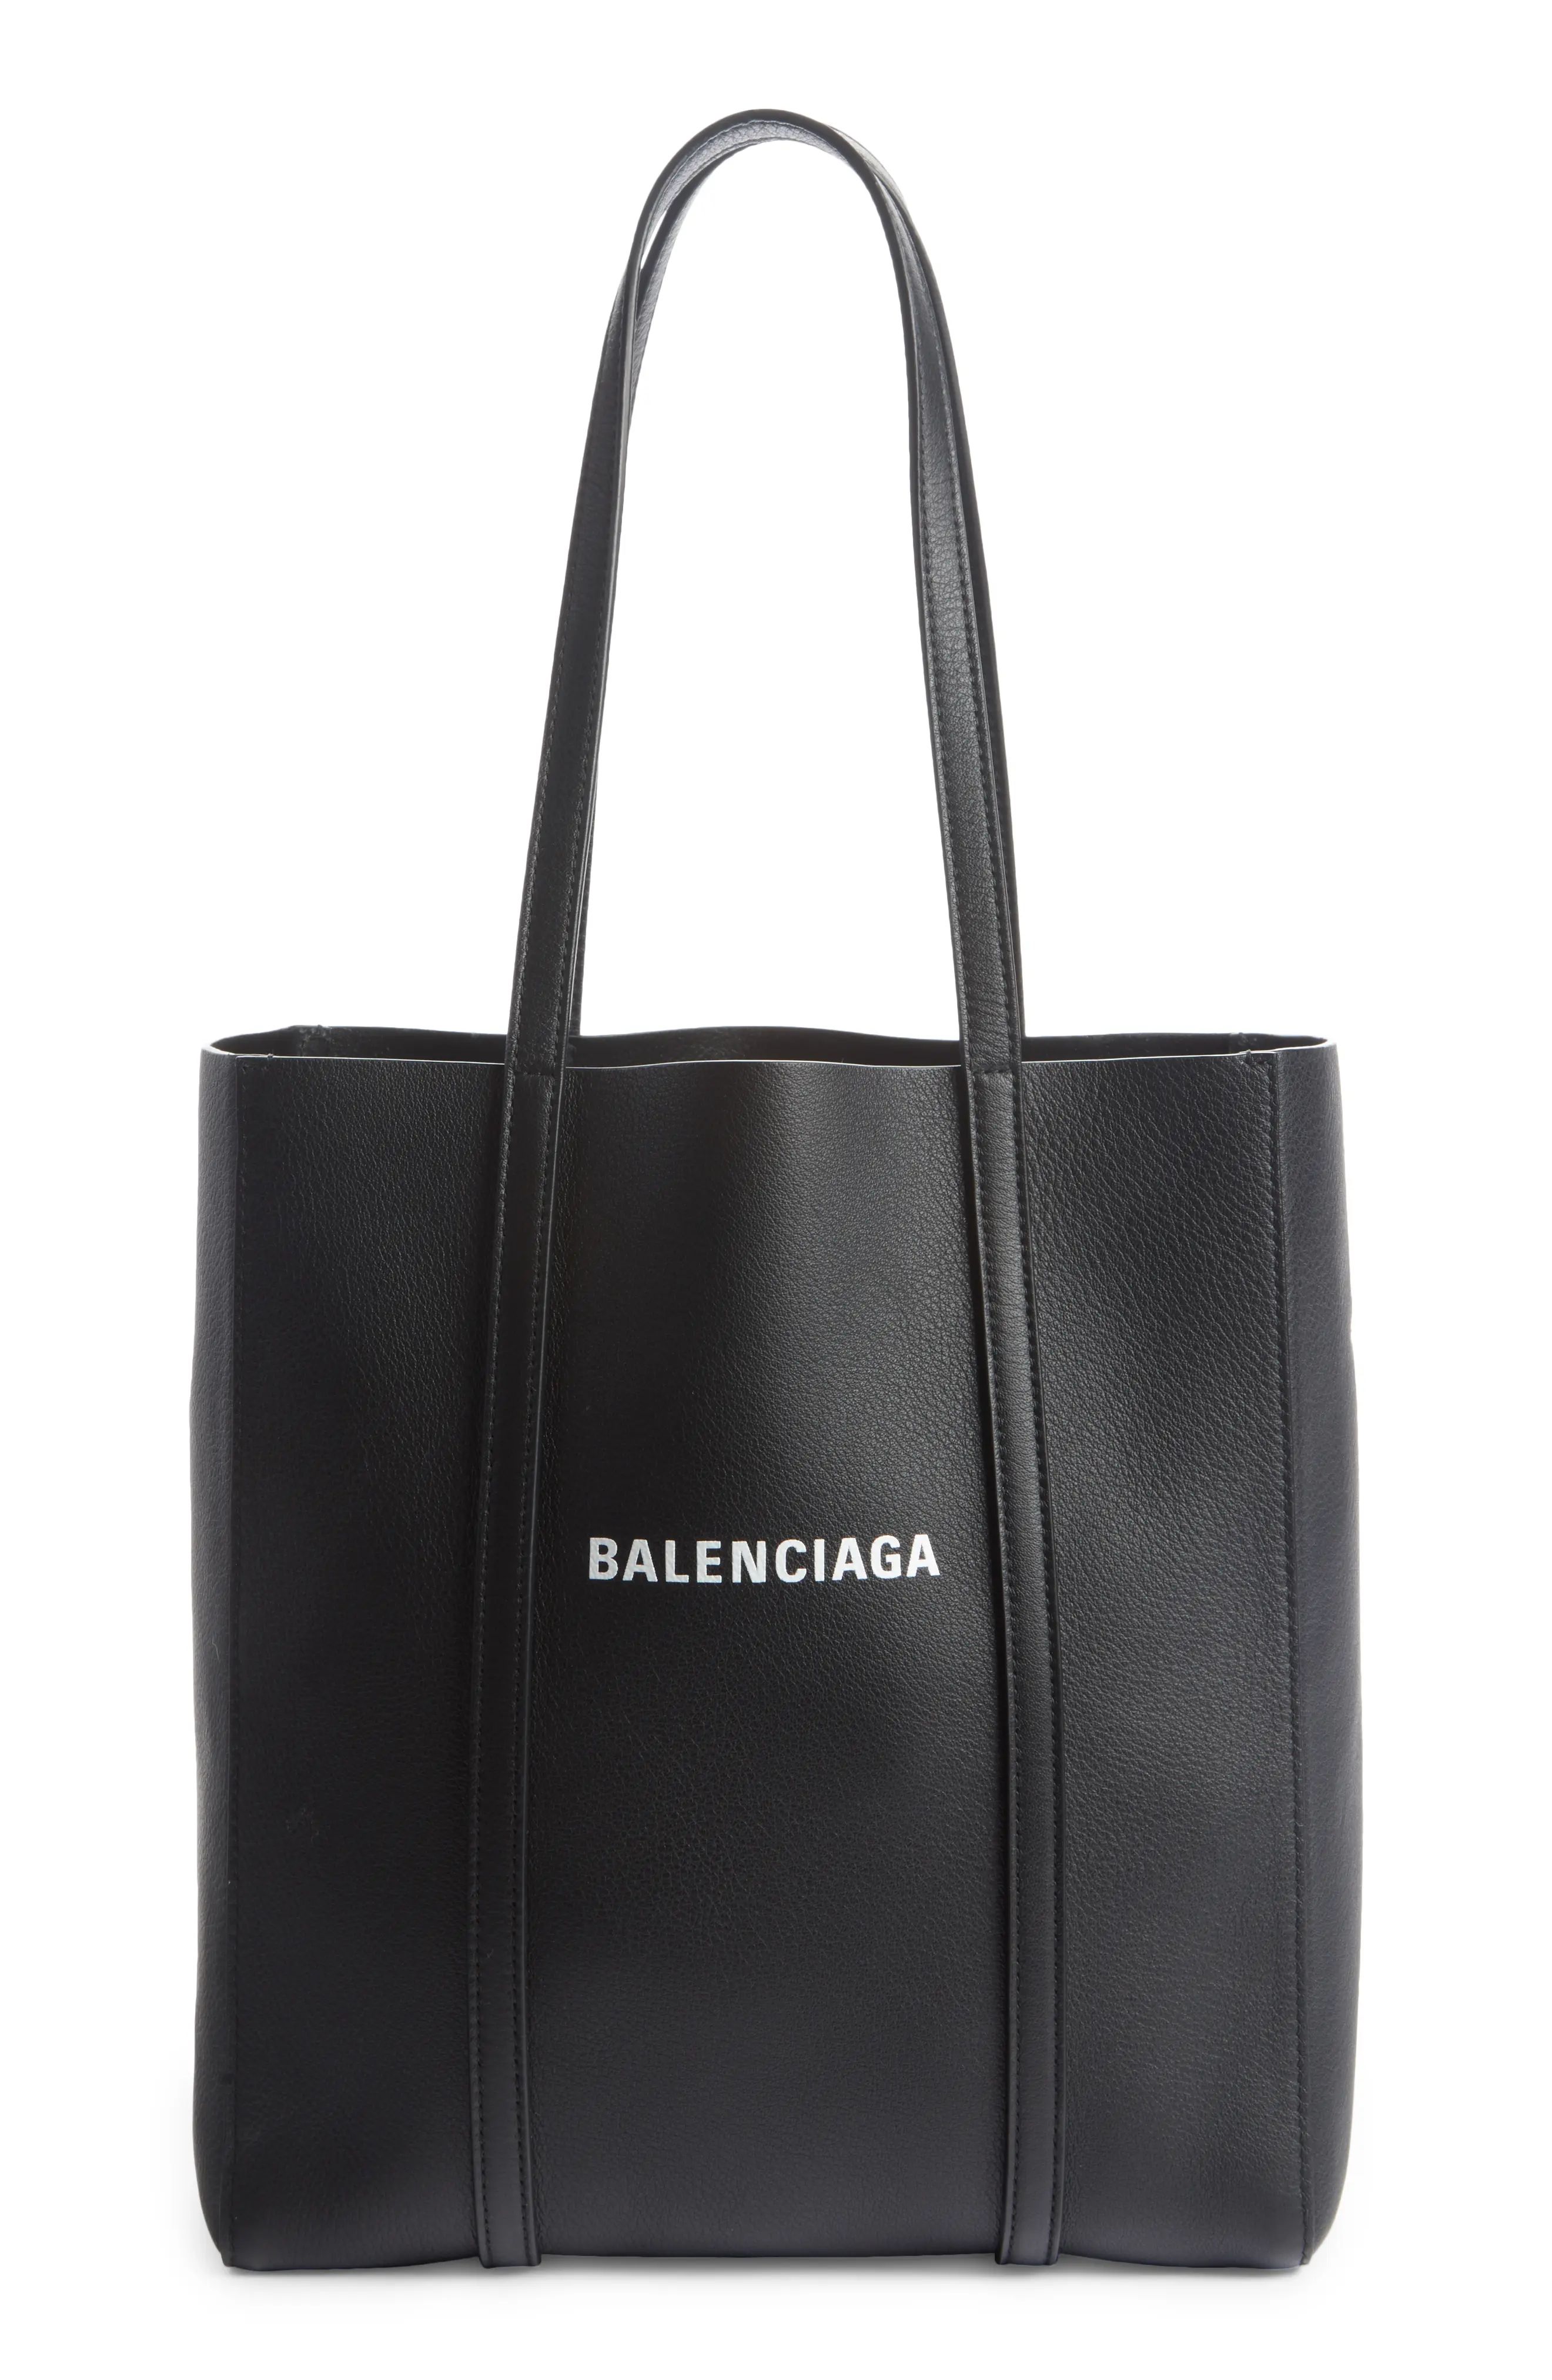 Balenciaga Extra Small Everyday Logo Calfskin Tote in Black/L White at Nordstrom | Nordstrom